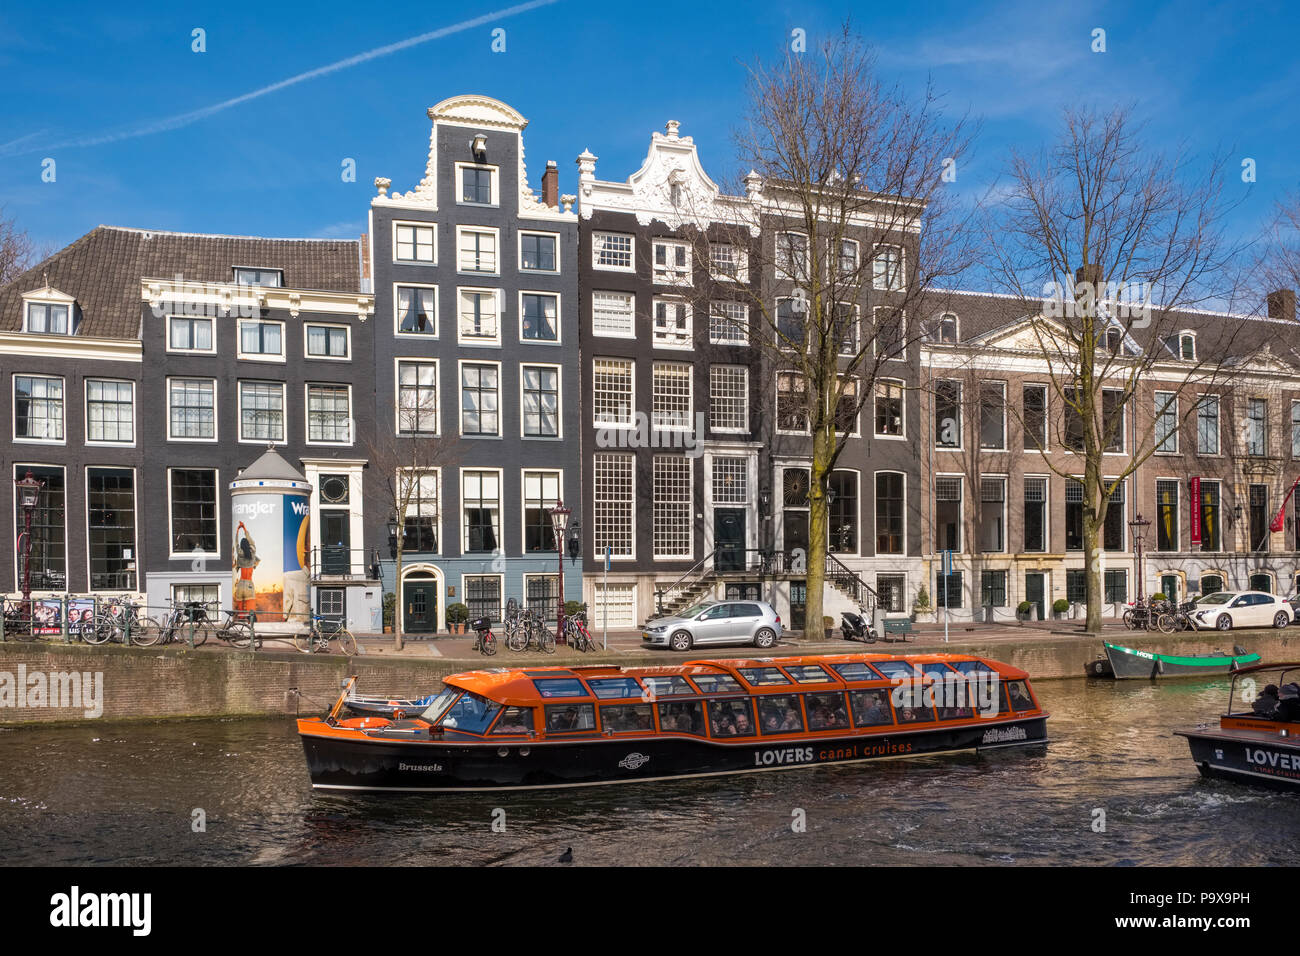 Sightseeing boat on a canal in Amsterdam, The Netherlands, Europe with traditional canal houses behind Stock Photo